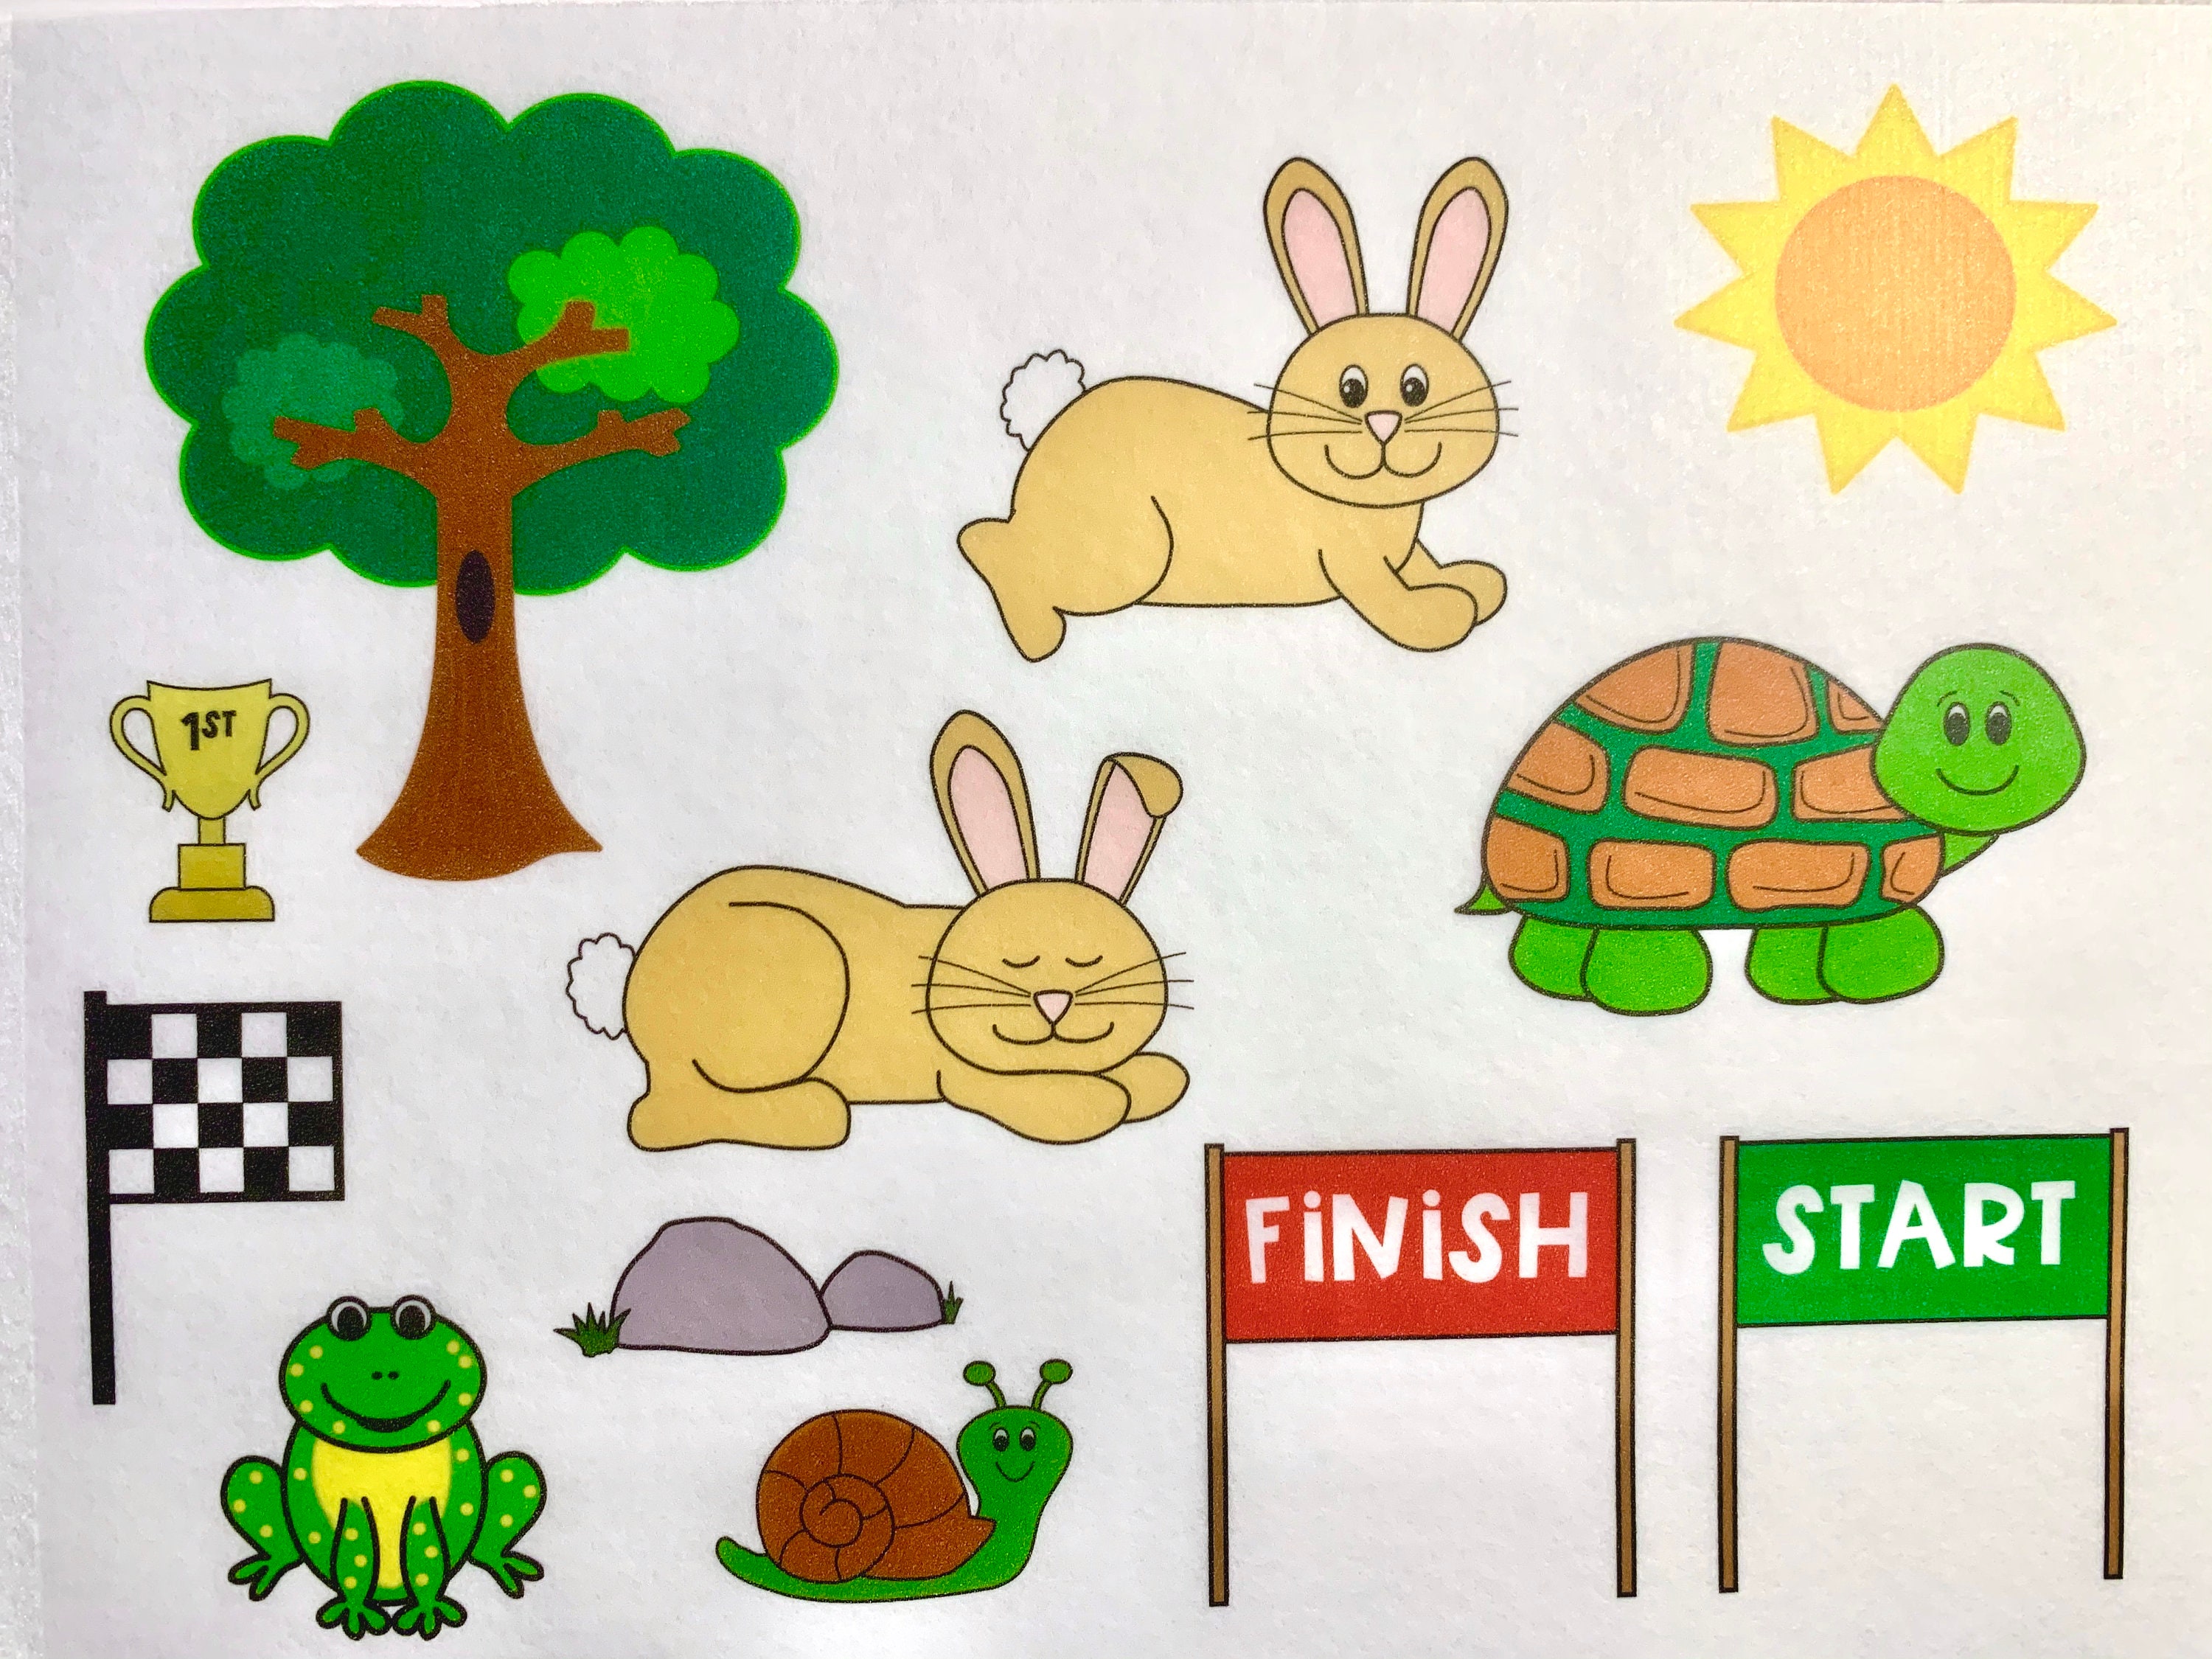 Tortoise and the hare felt board story aseops fables felt stories flannel felt story speech therapy activity turtle and rabbit felt